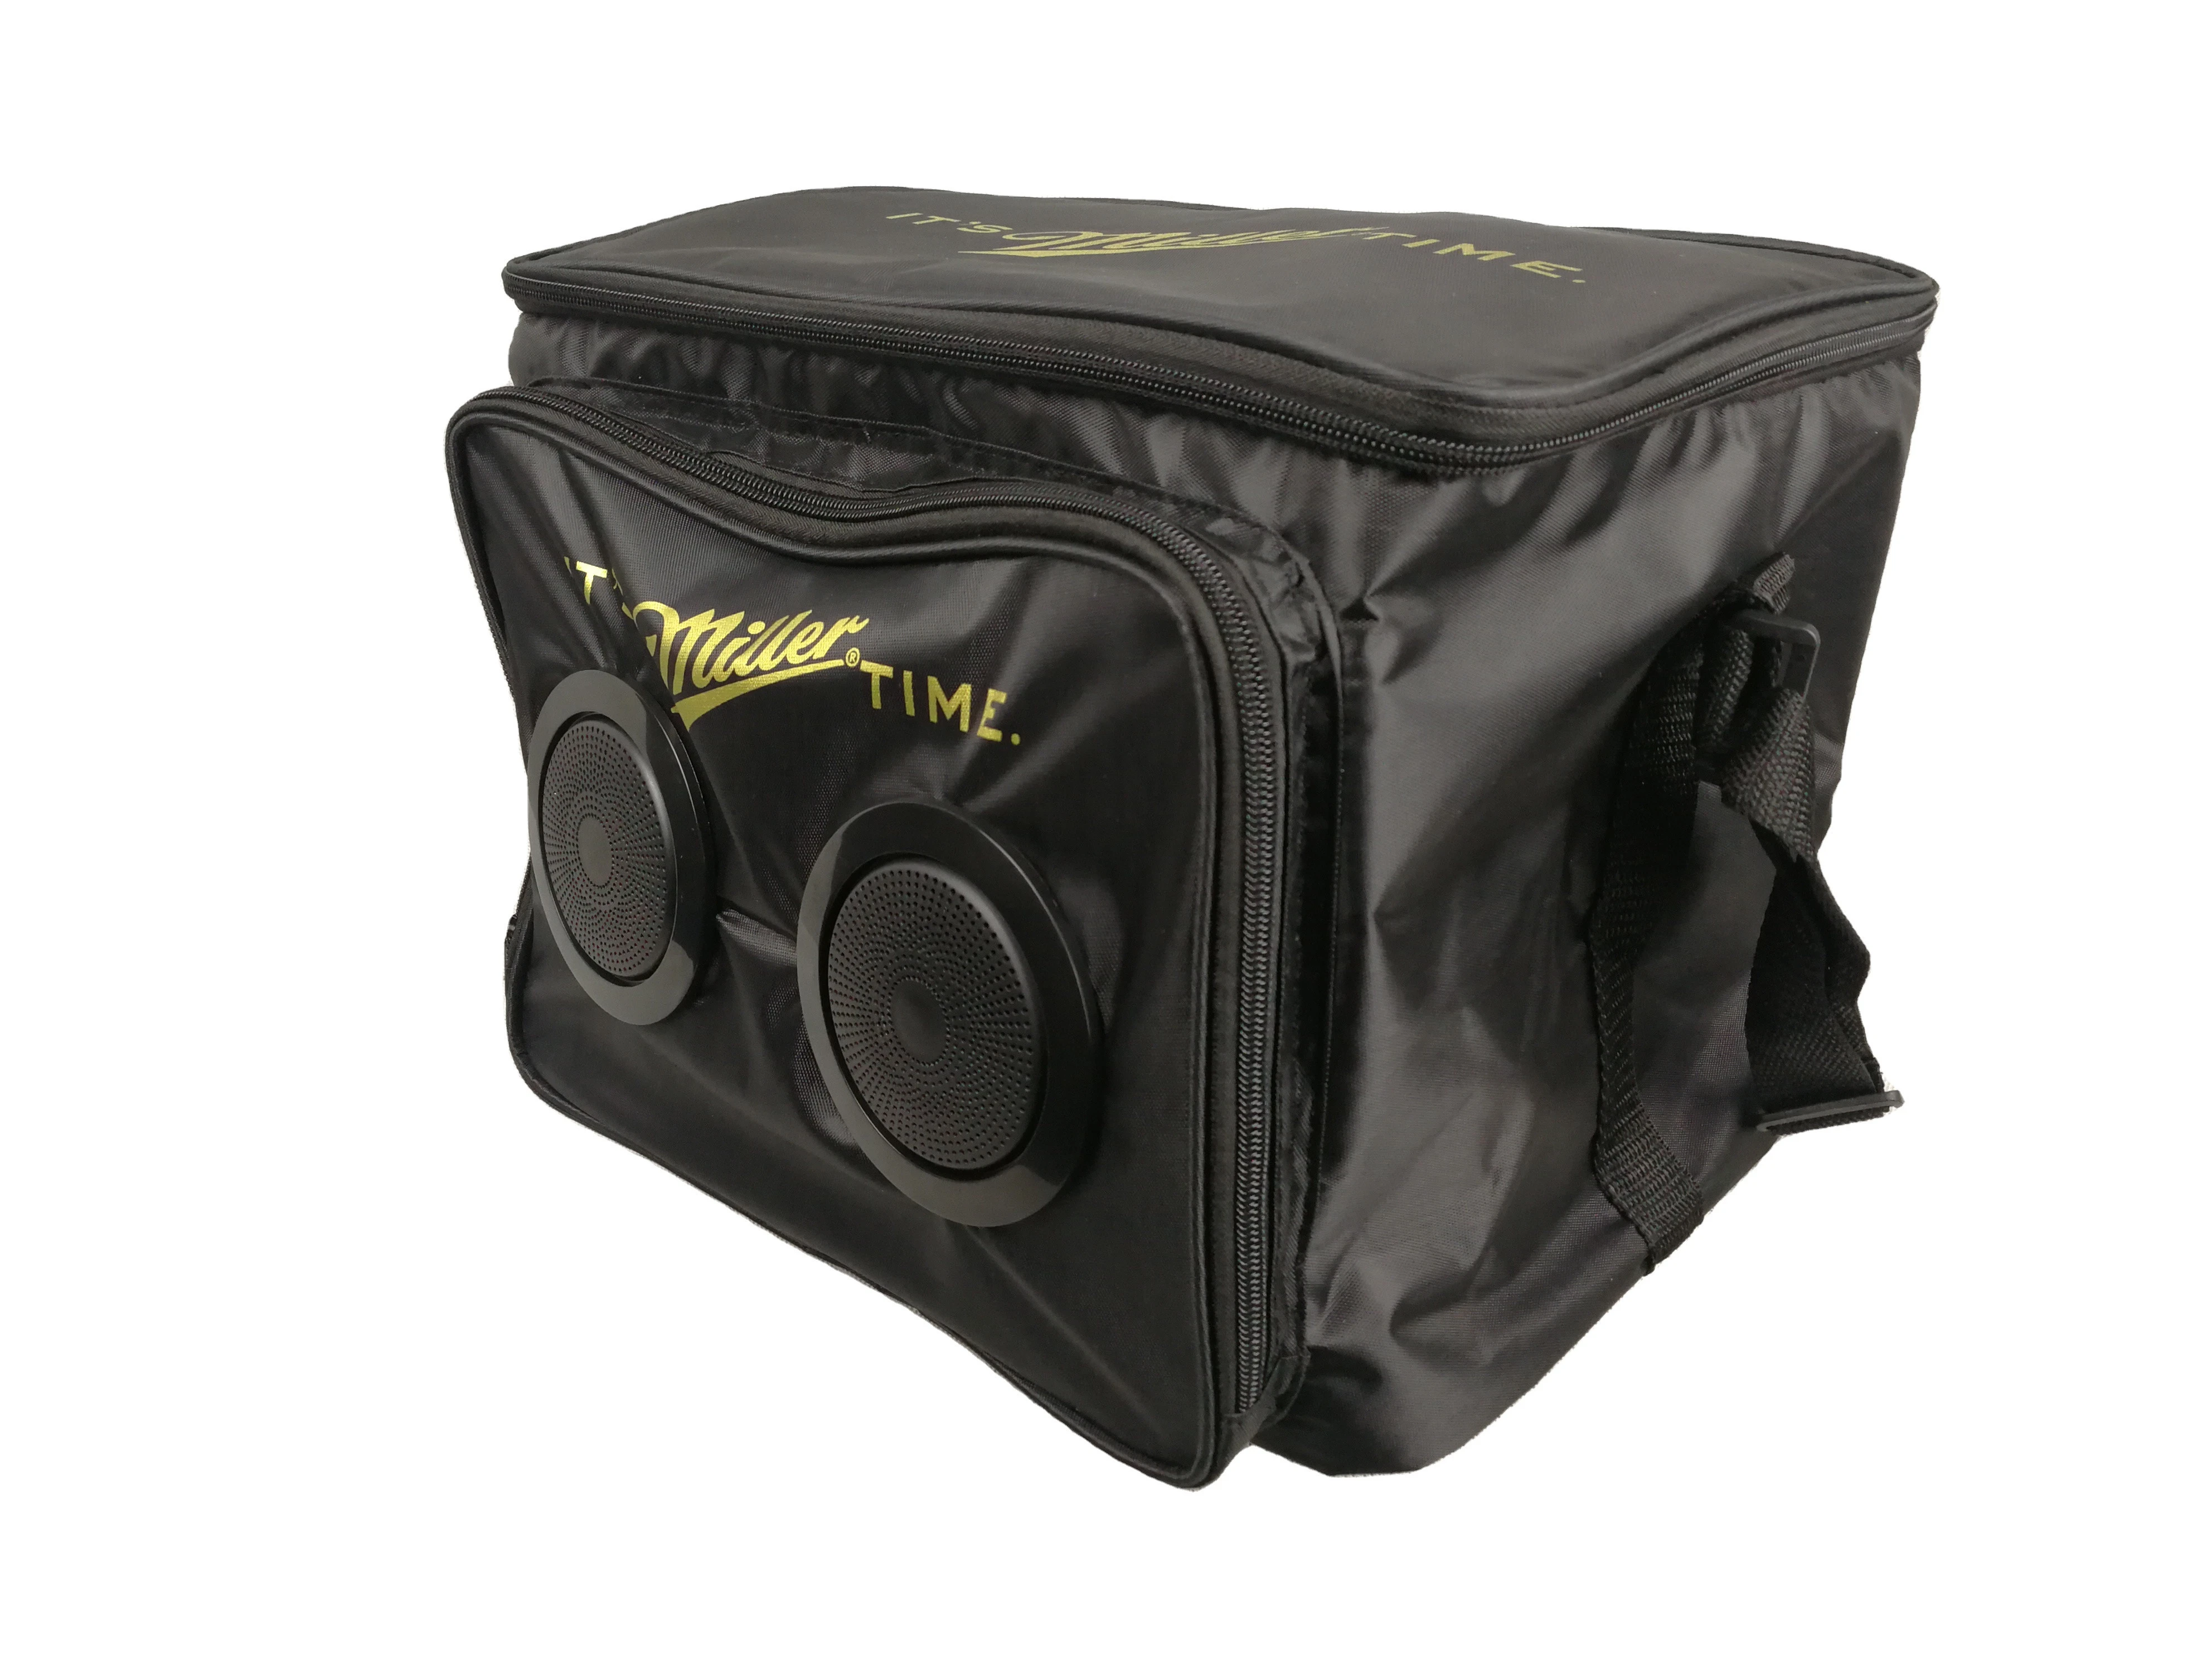 12 Cans Cooler bag with Bluetooth Speakers for Parties/Festivals/Beach/School.